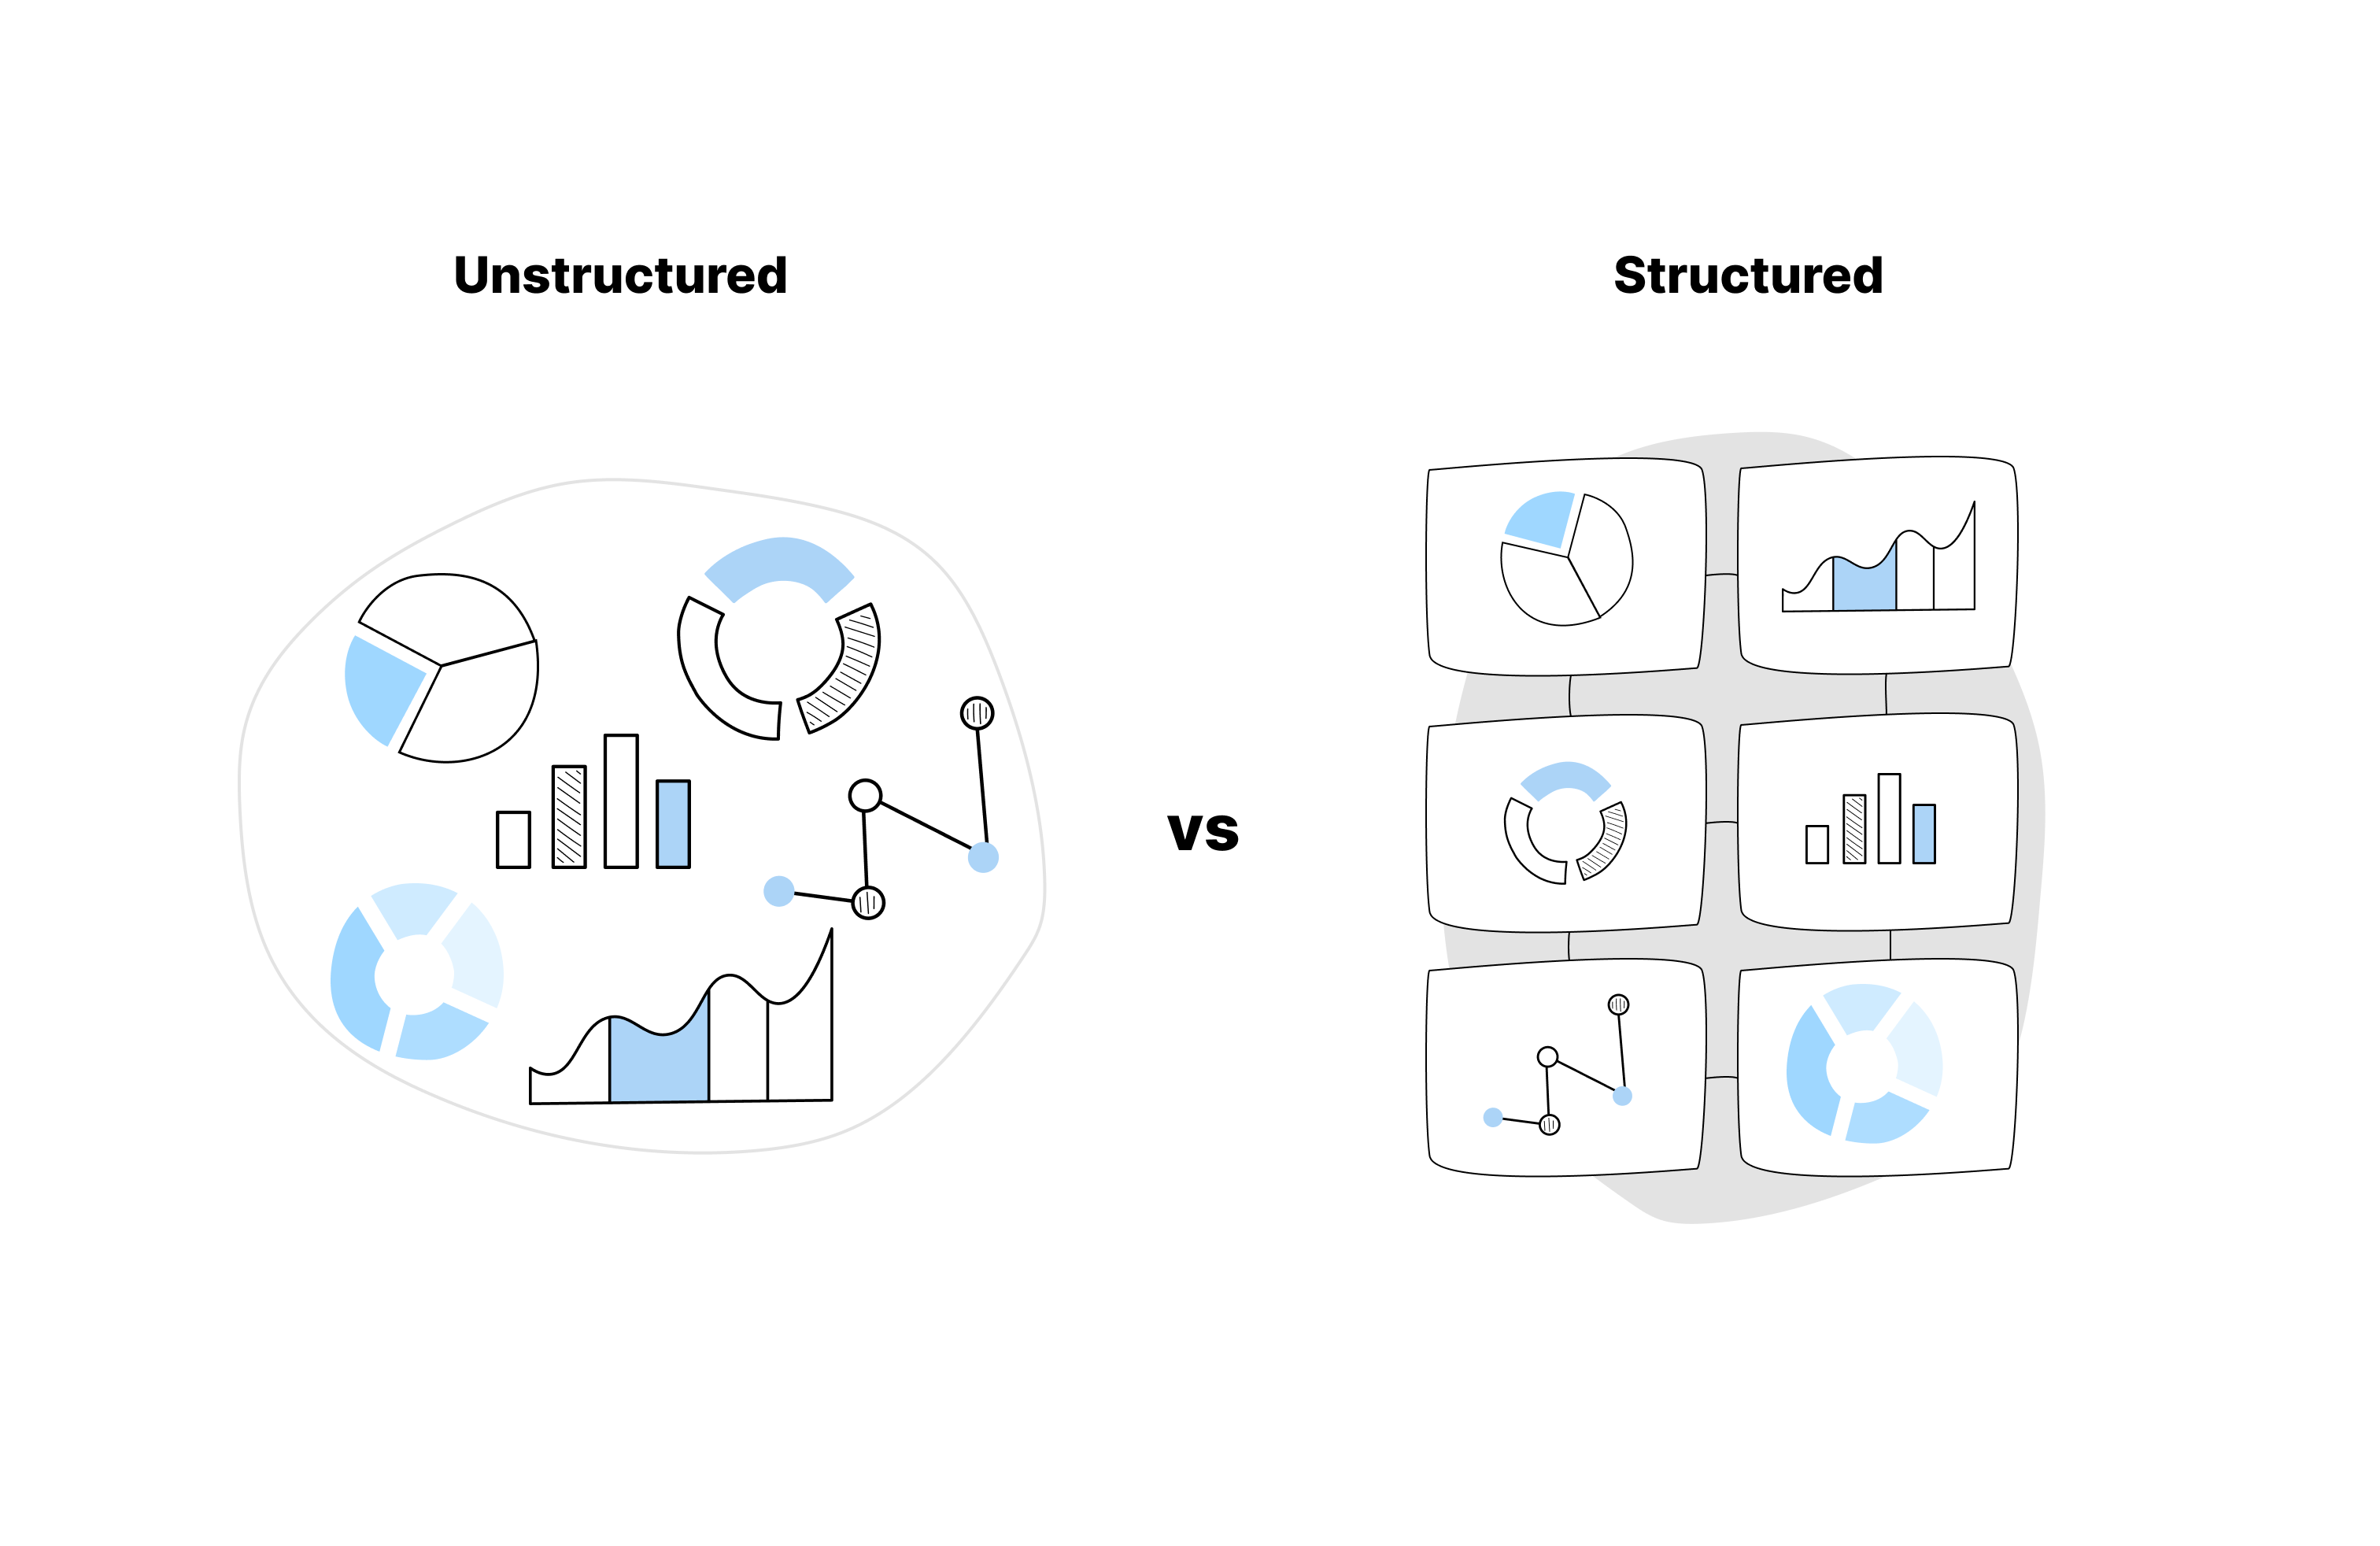 a diagram showing the differences between unstructured and structured data.